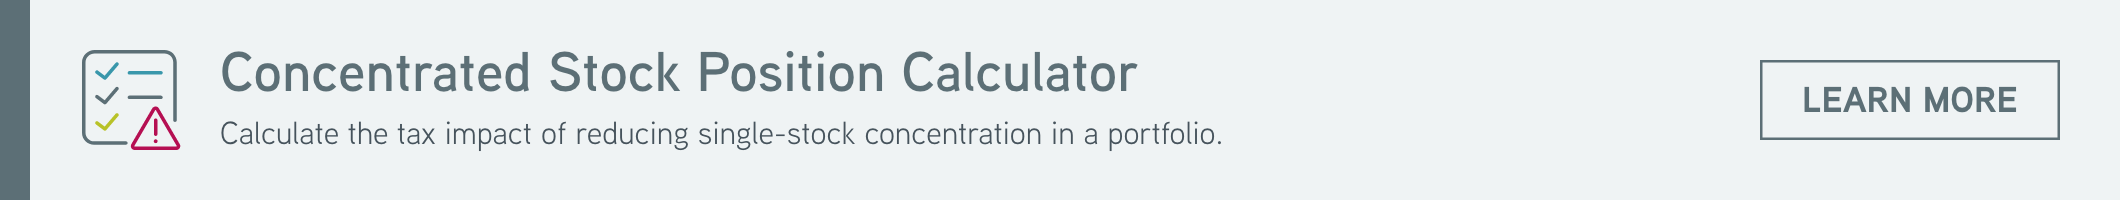 Concentrated stock position calculator desktop